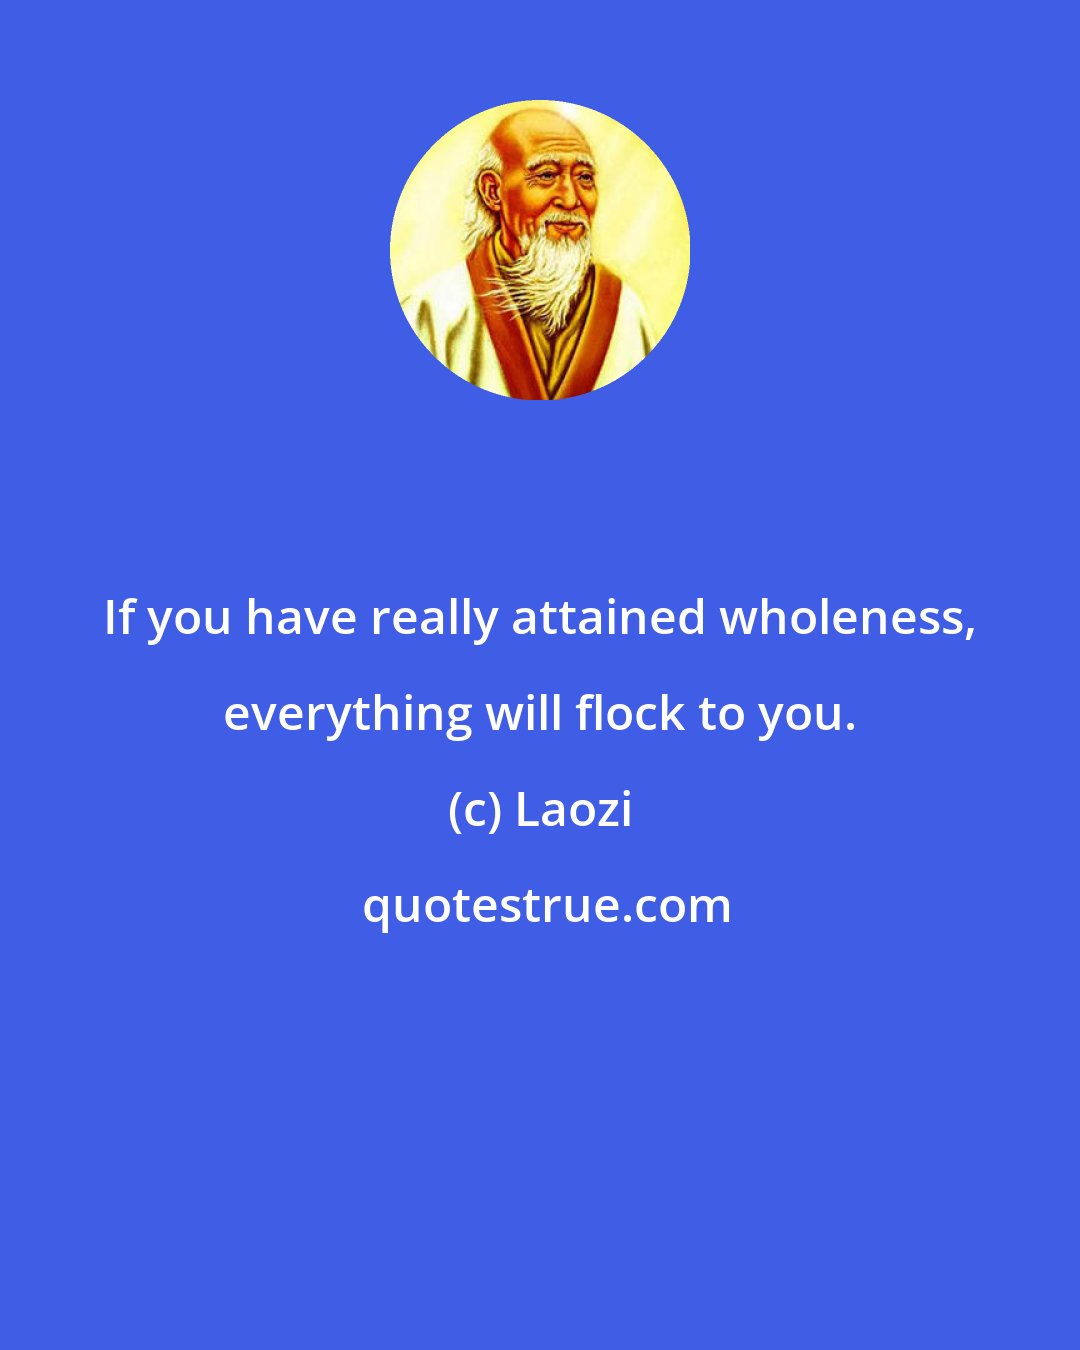 Laozi: If you have really attained wholeness, everything will flock to you.